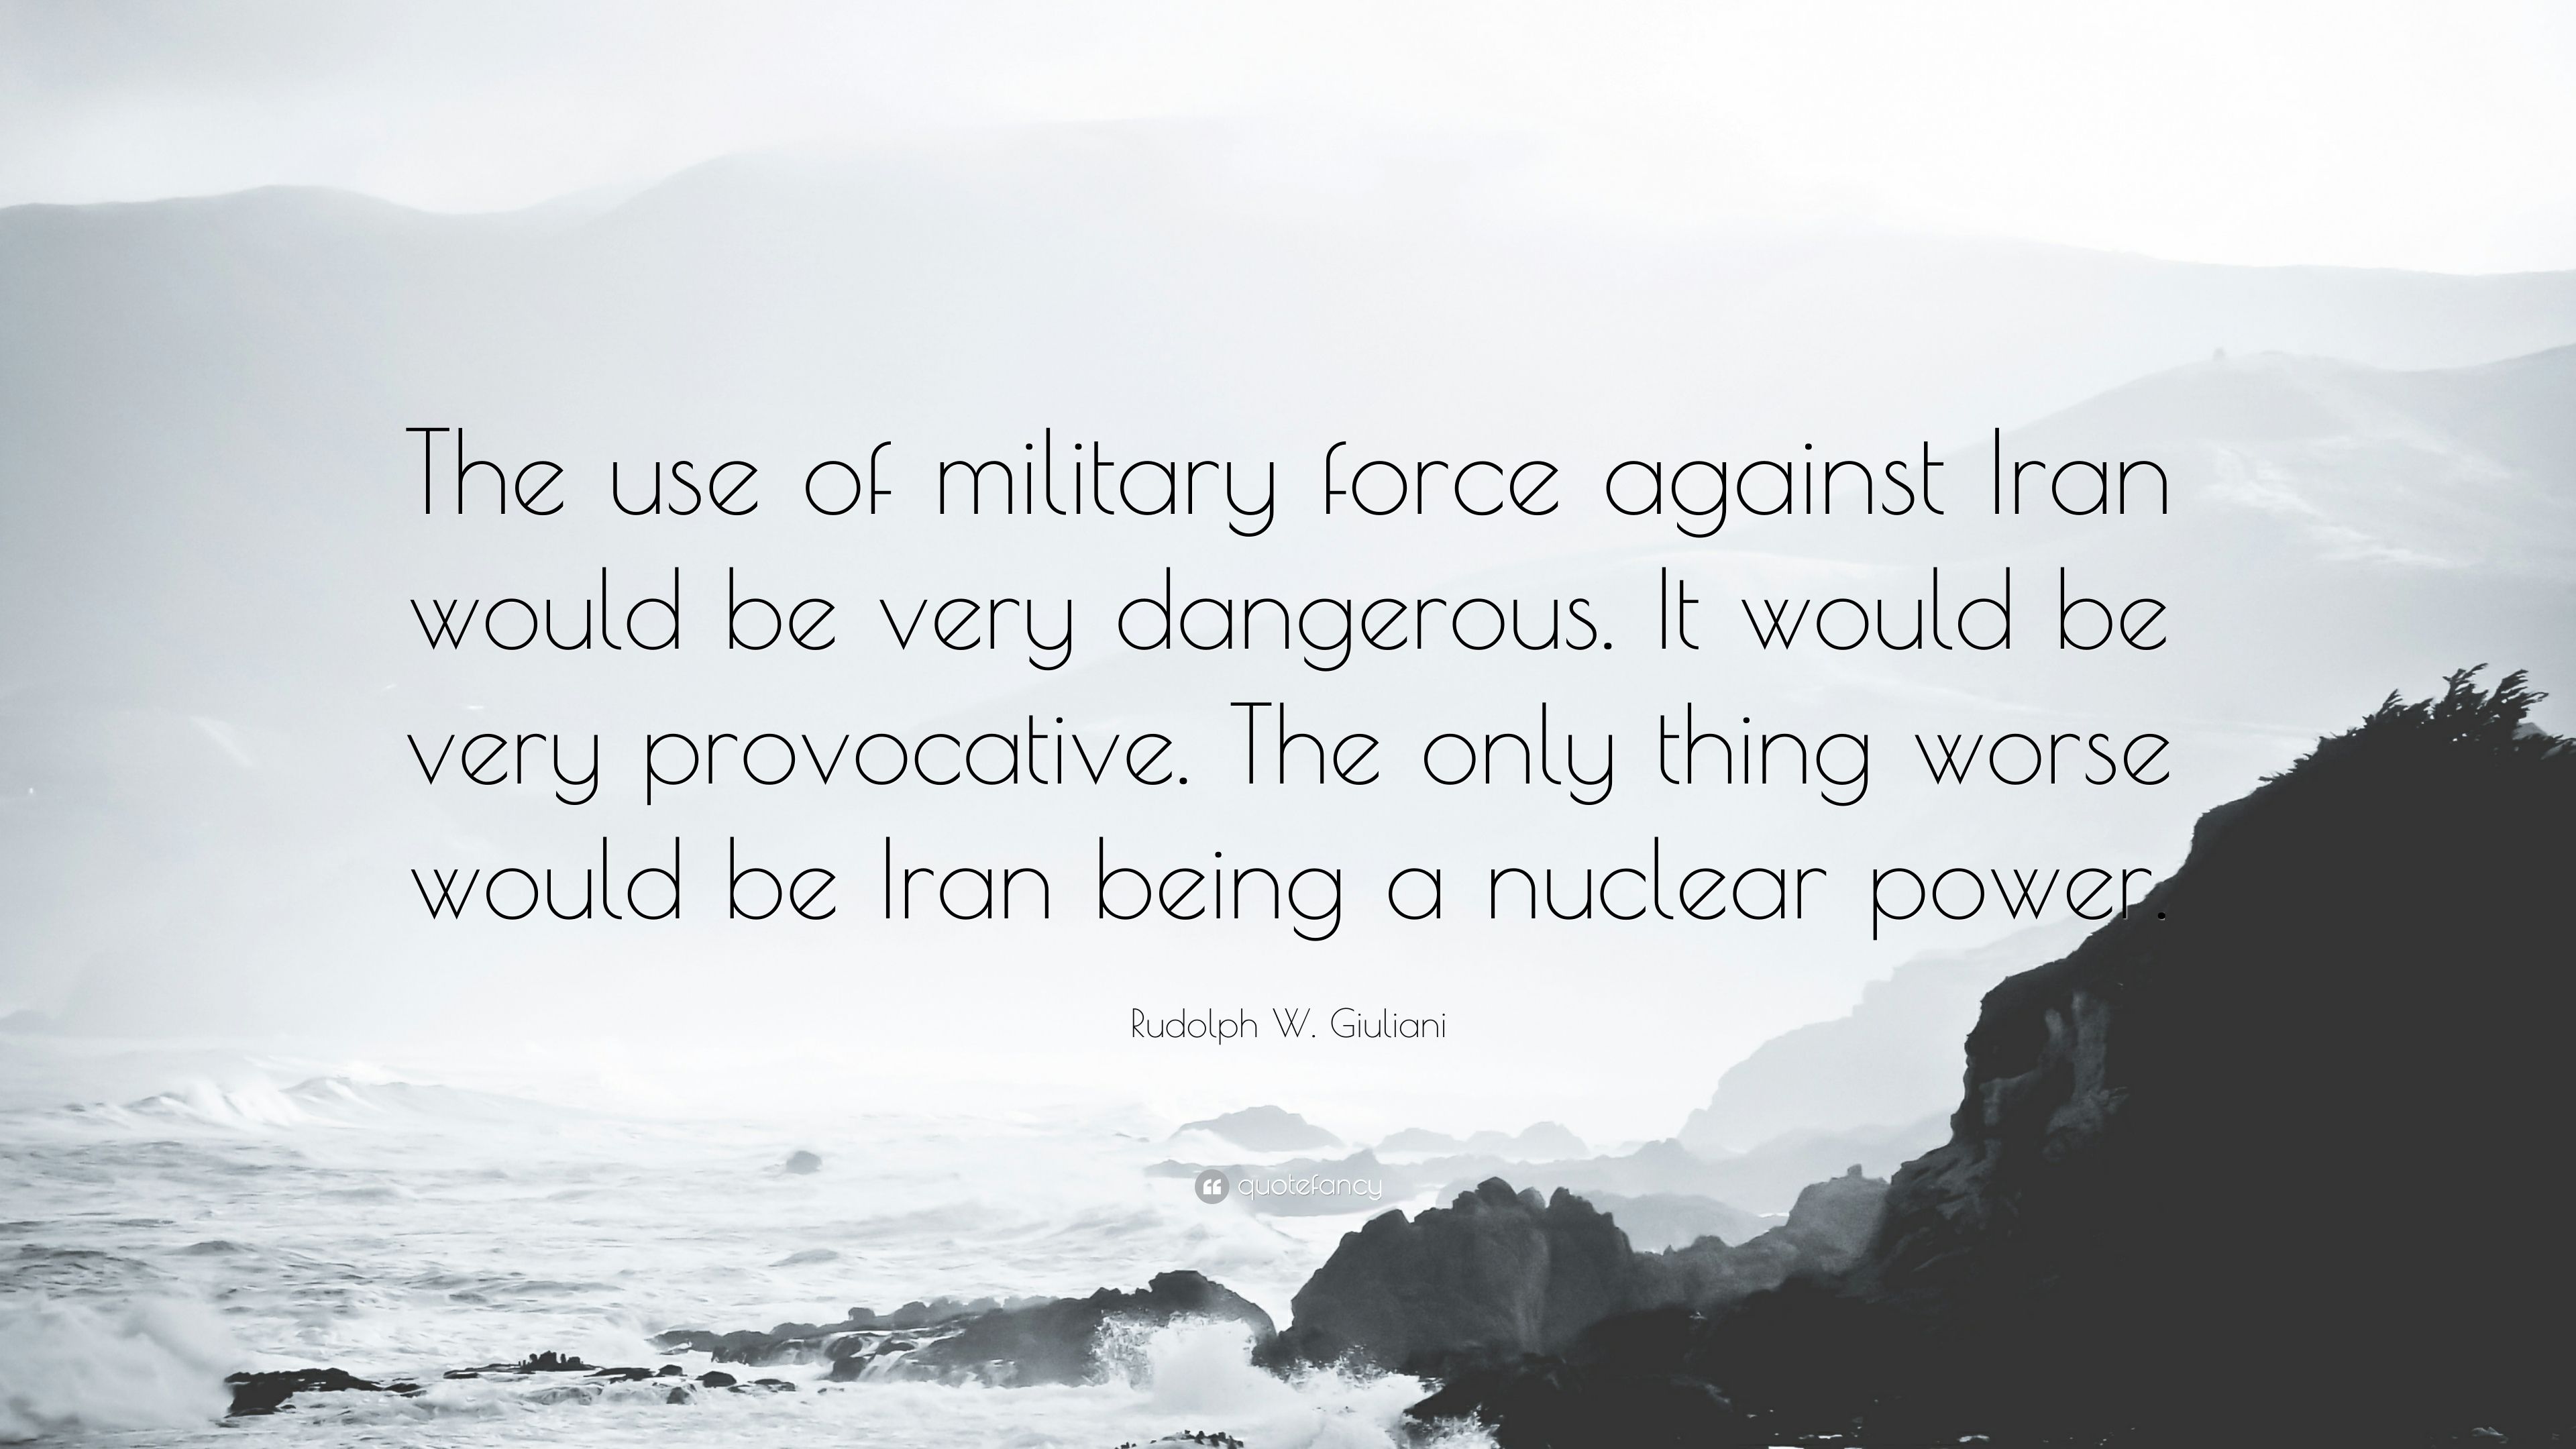 Rudolph W. Giuliani Quote: “The use of military force against Iran